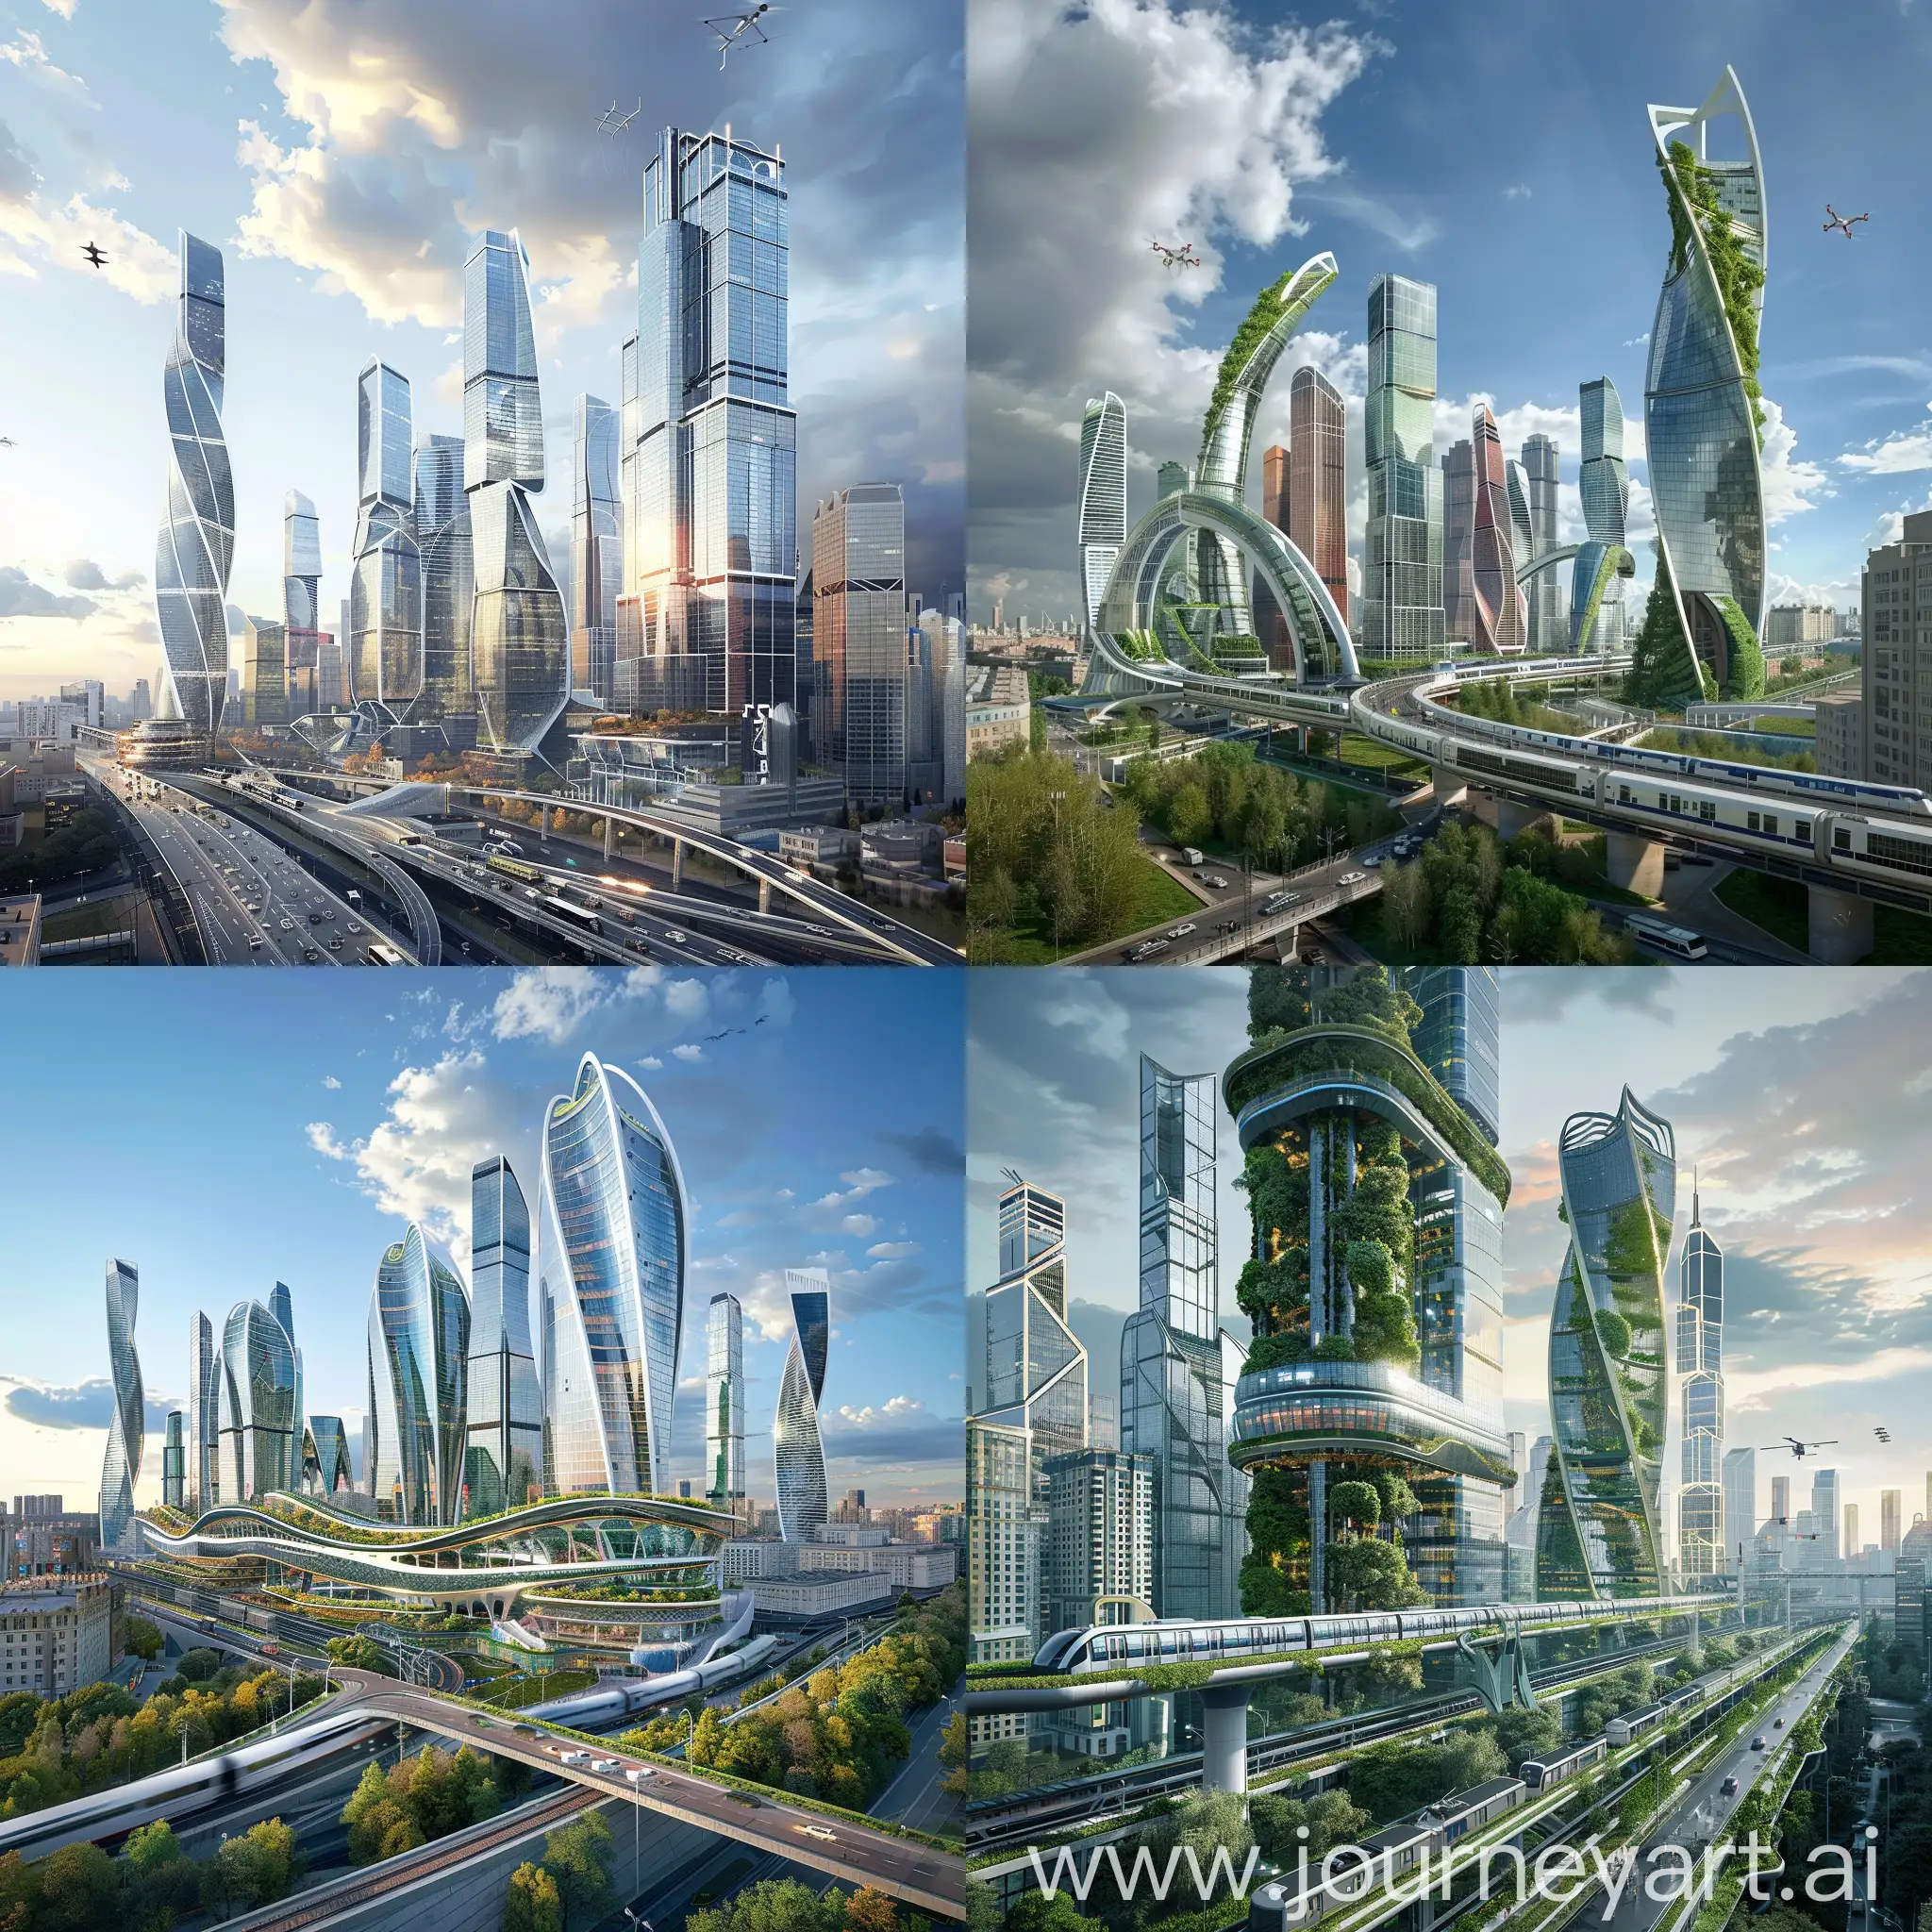 Futuristic Moscow, Smart Facades, Vertical Gardens, Autonomous Public Transport, Augmented Reality Navigation, Energy-Generating Pavements, Drone Delivery Ports, Modular Construction, Hyperloop Connections:, Smart Waste Management, Interactive Public Art, Interactive Building Exteriors, Drone Highways, Solar Glass Skyscrapers, 3D-Printed Bridges, Atmospheric Water Generators, Wind Turbine Integration, Smart Lighting, Robotic Maintenance Drones, Magnetic Levitation (Maglev) Trains, Holographic Signage, Futurism, Modern Age, Information Age, Imagination Age, In Unreal Engine 5 Style --stylize 1000